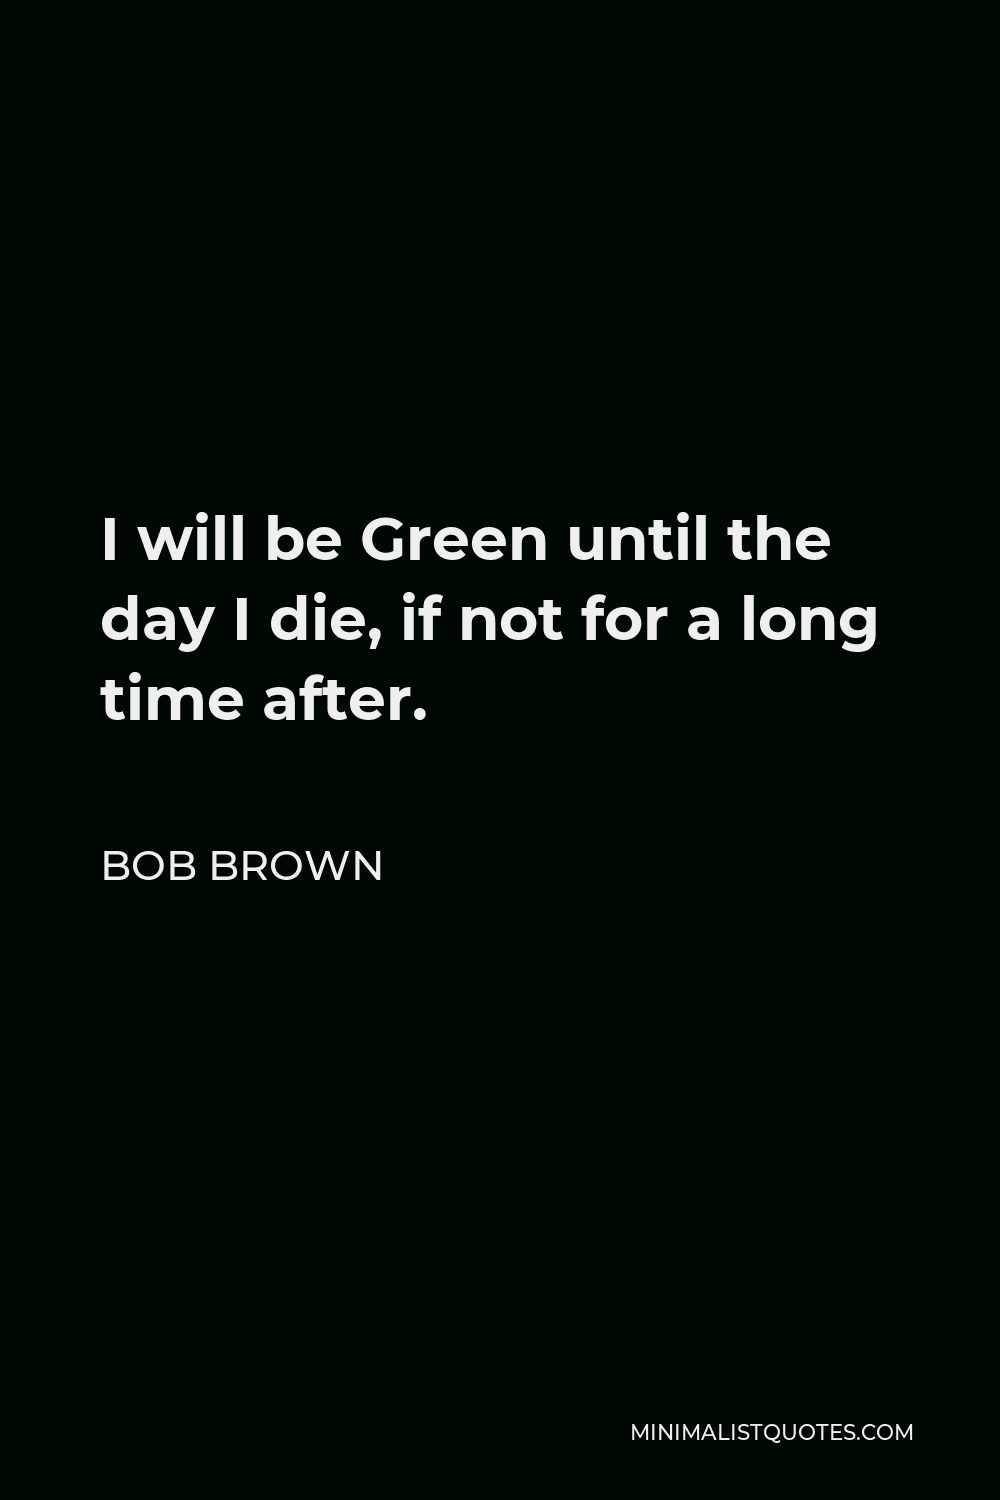 Bob Brown Quote - I will be Green until the day I die, if not for a long time after.